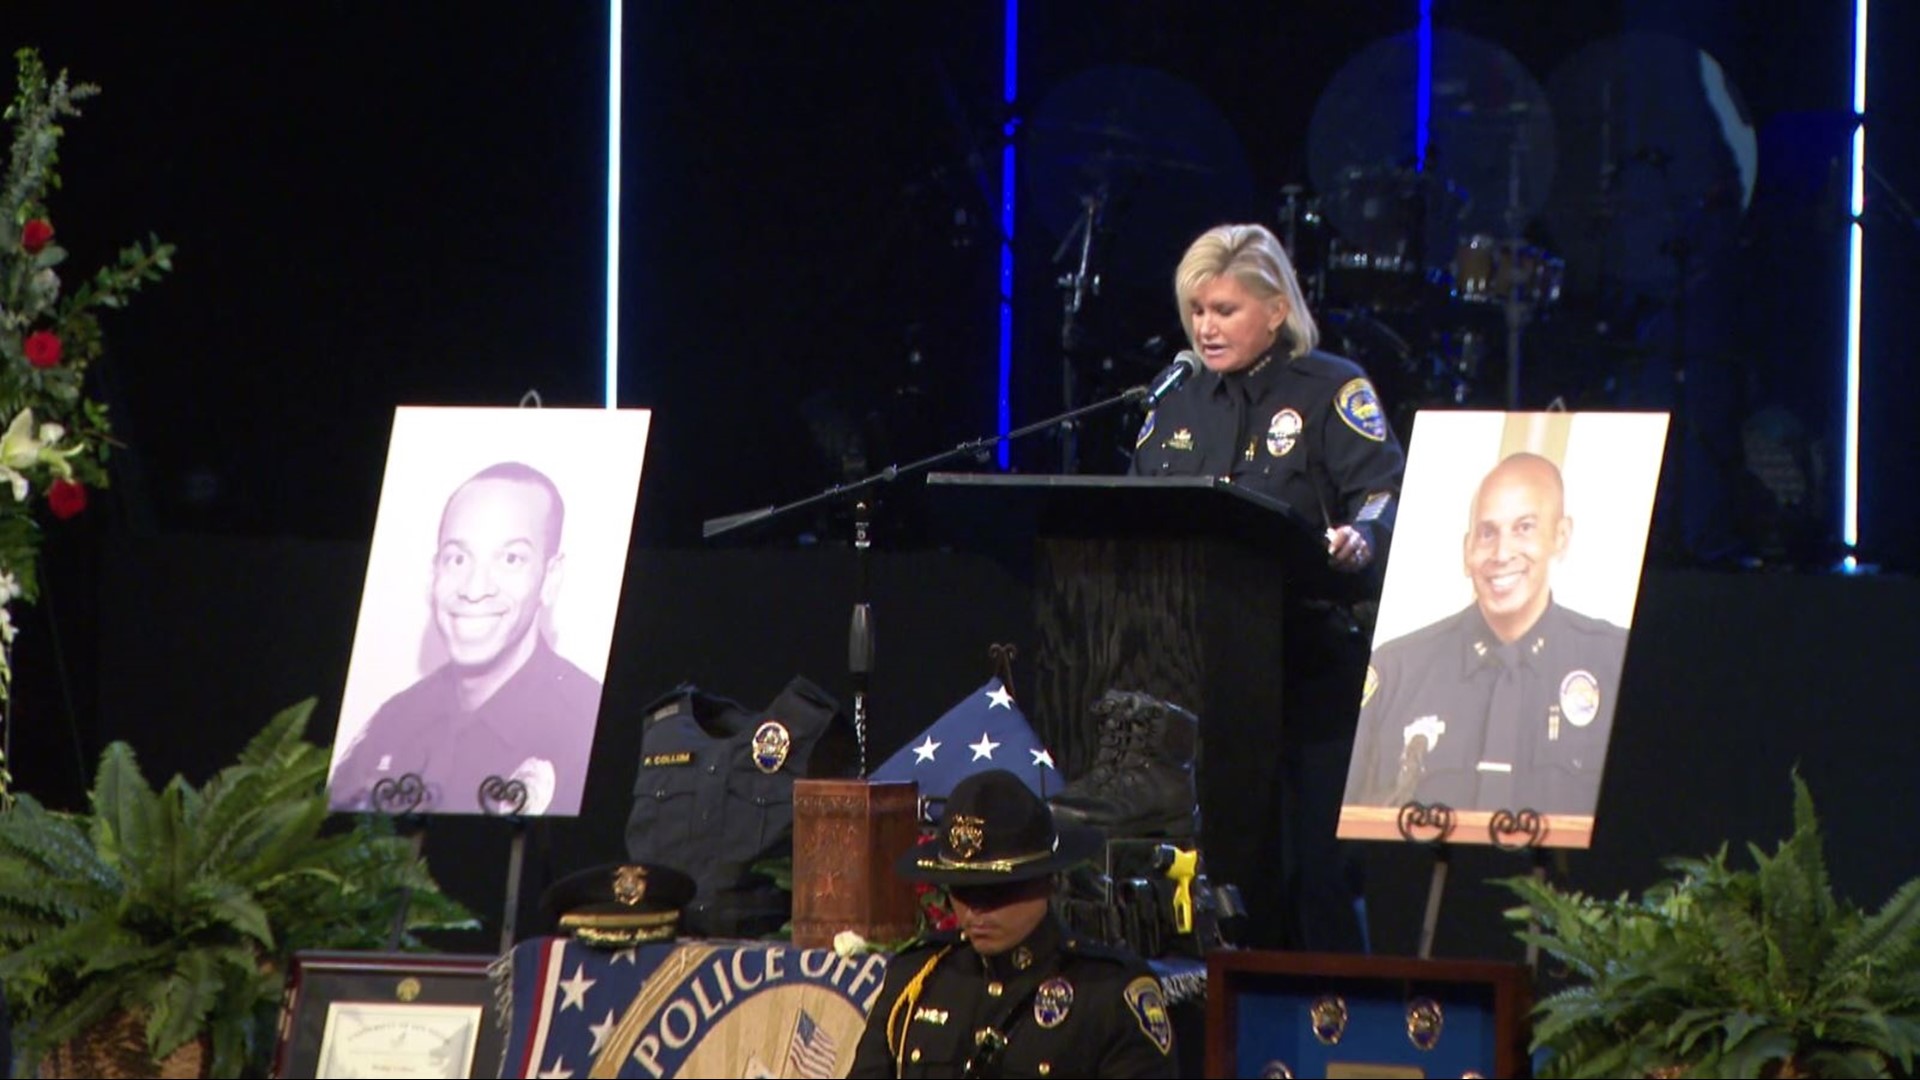 Collum was part of the Chula Vista Police Department for nearly 30 years. During his tenure, he became a trailblazer and paved the way through his dedication.